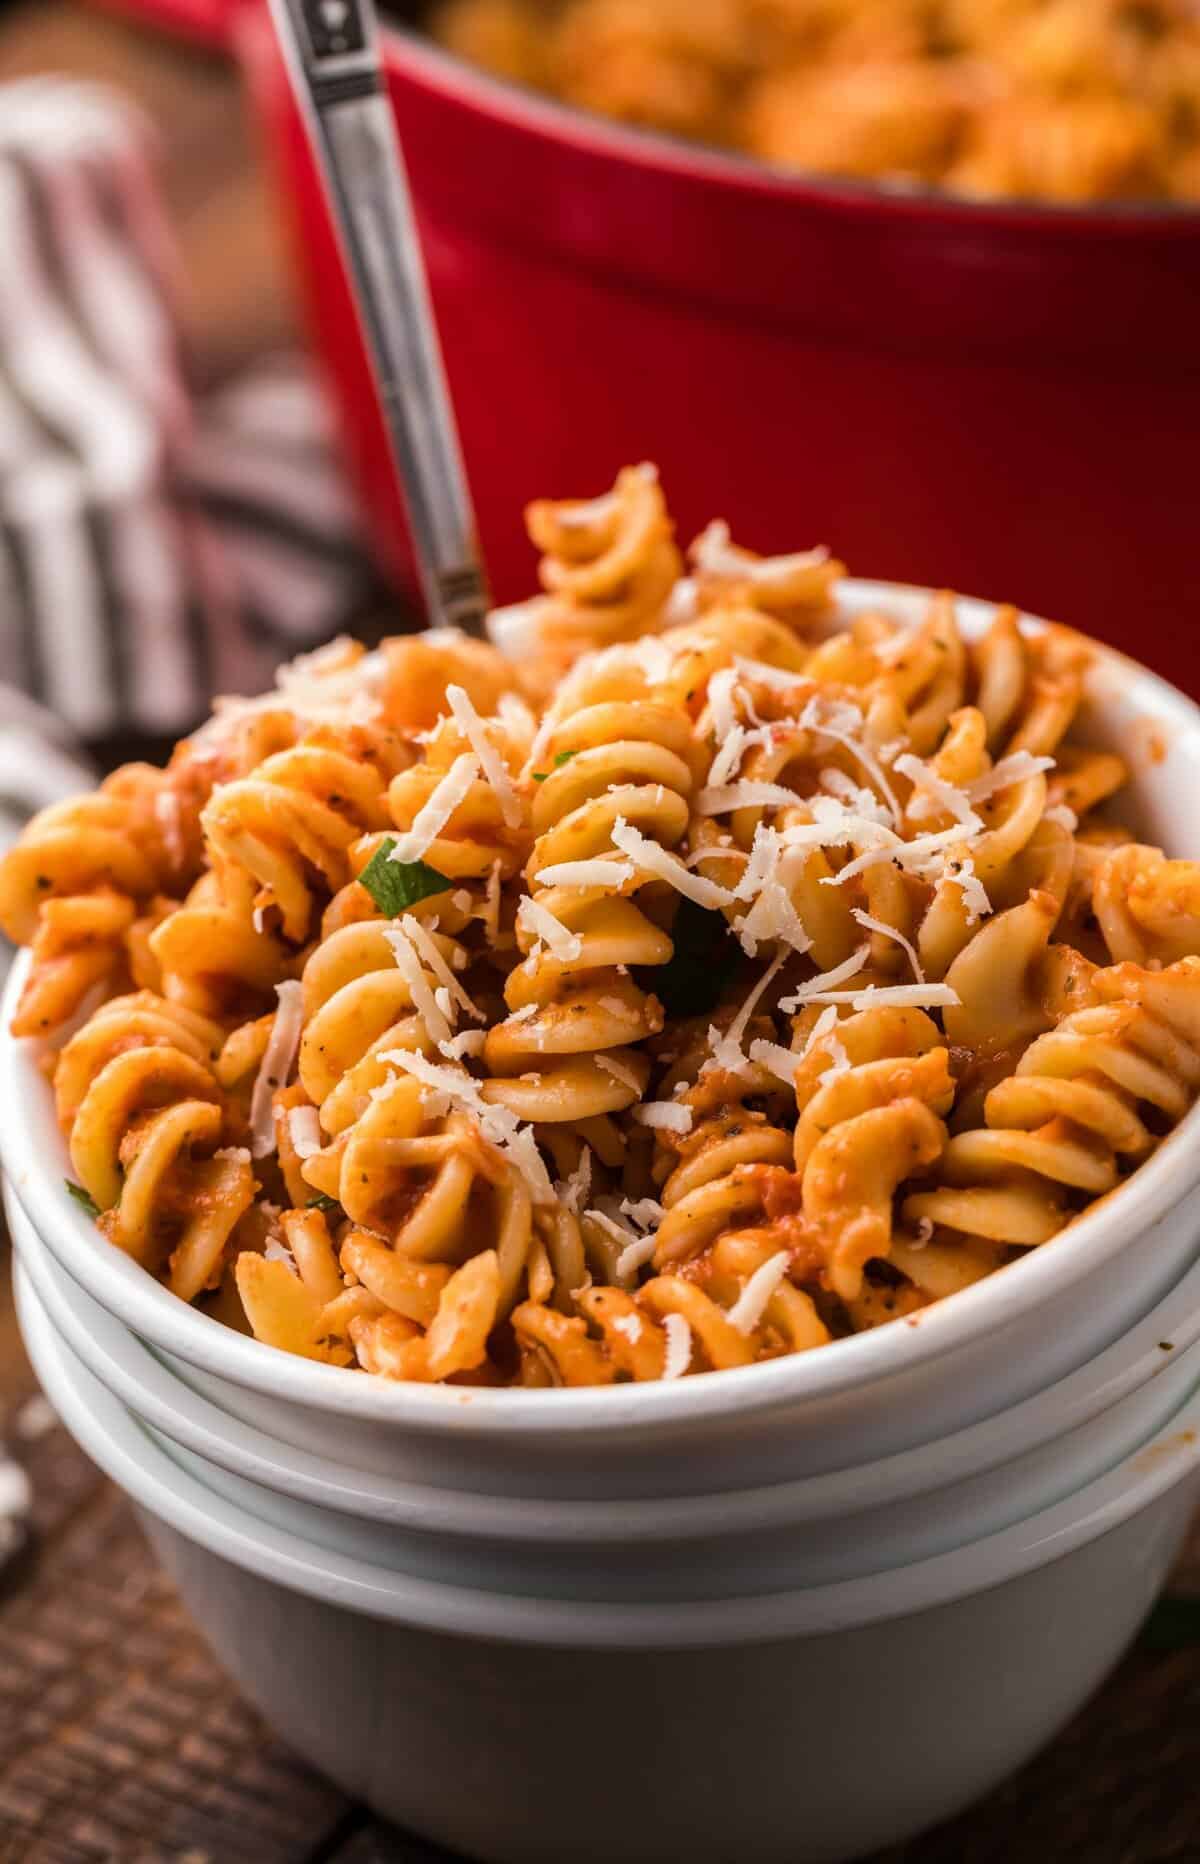 Spicy fusilli pasta with grated parmesan cheese in a white bowl.